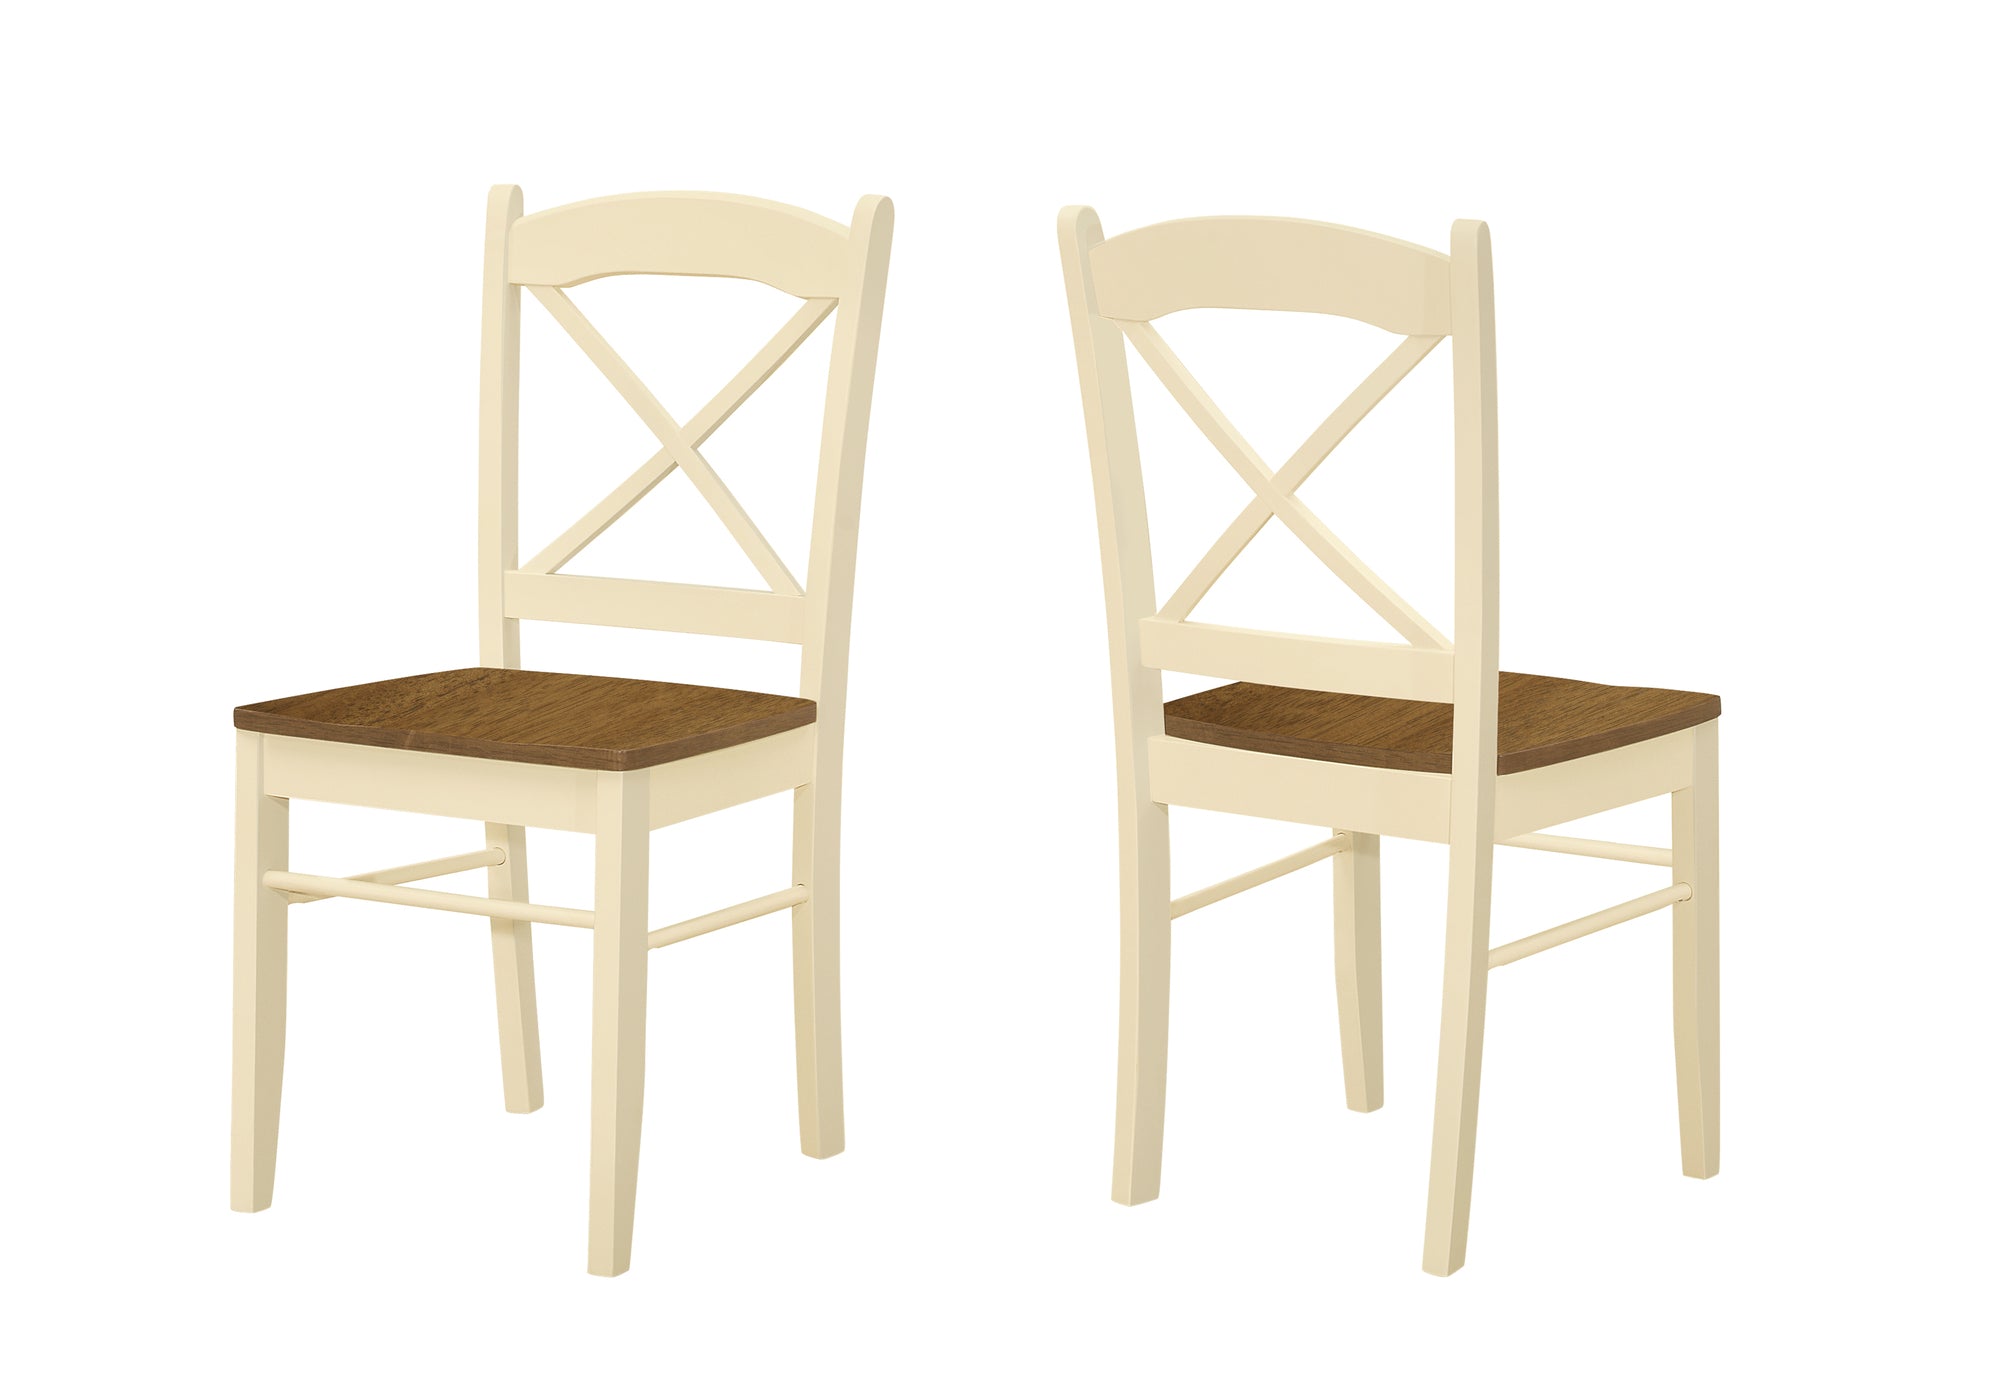 MN-231325    Dining Chair, Set Of 2, Side, Kitchen, Dining Room, Oak And Cream, Wood Legs, Transitional